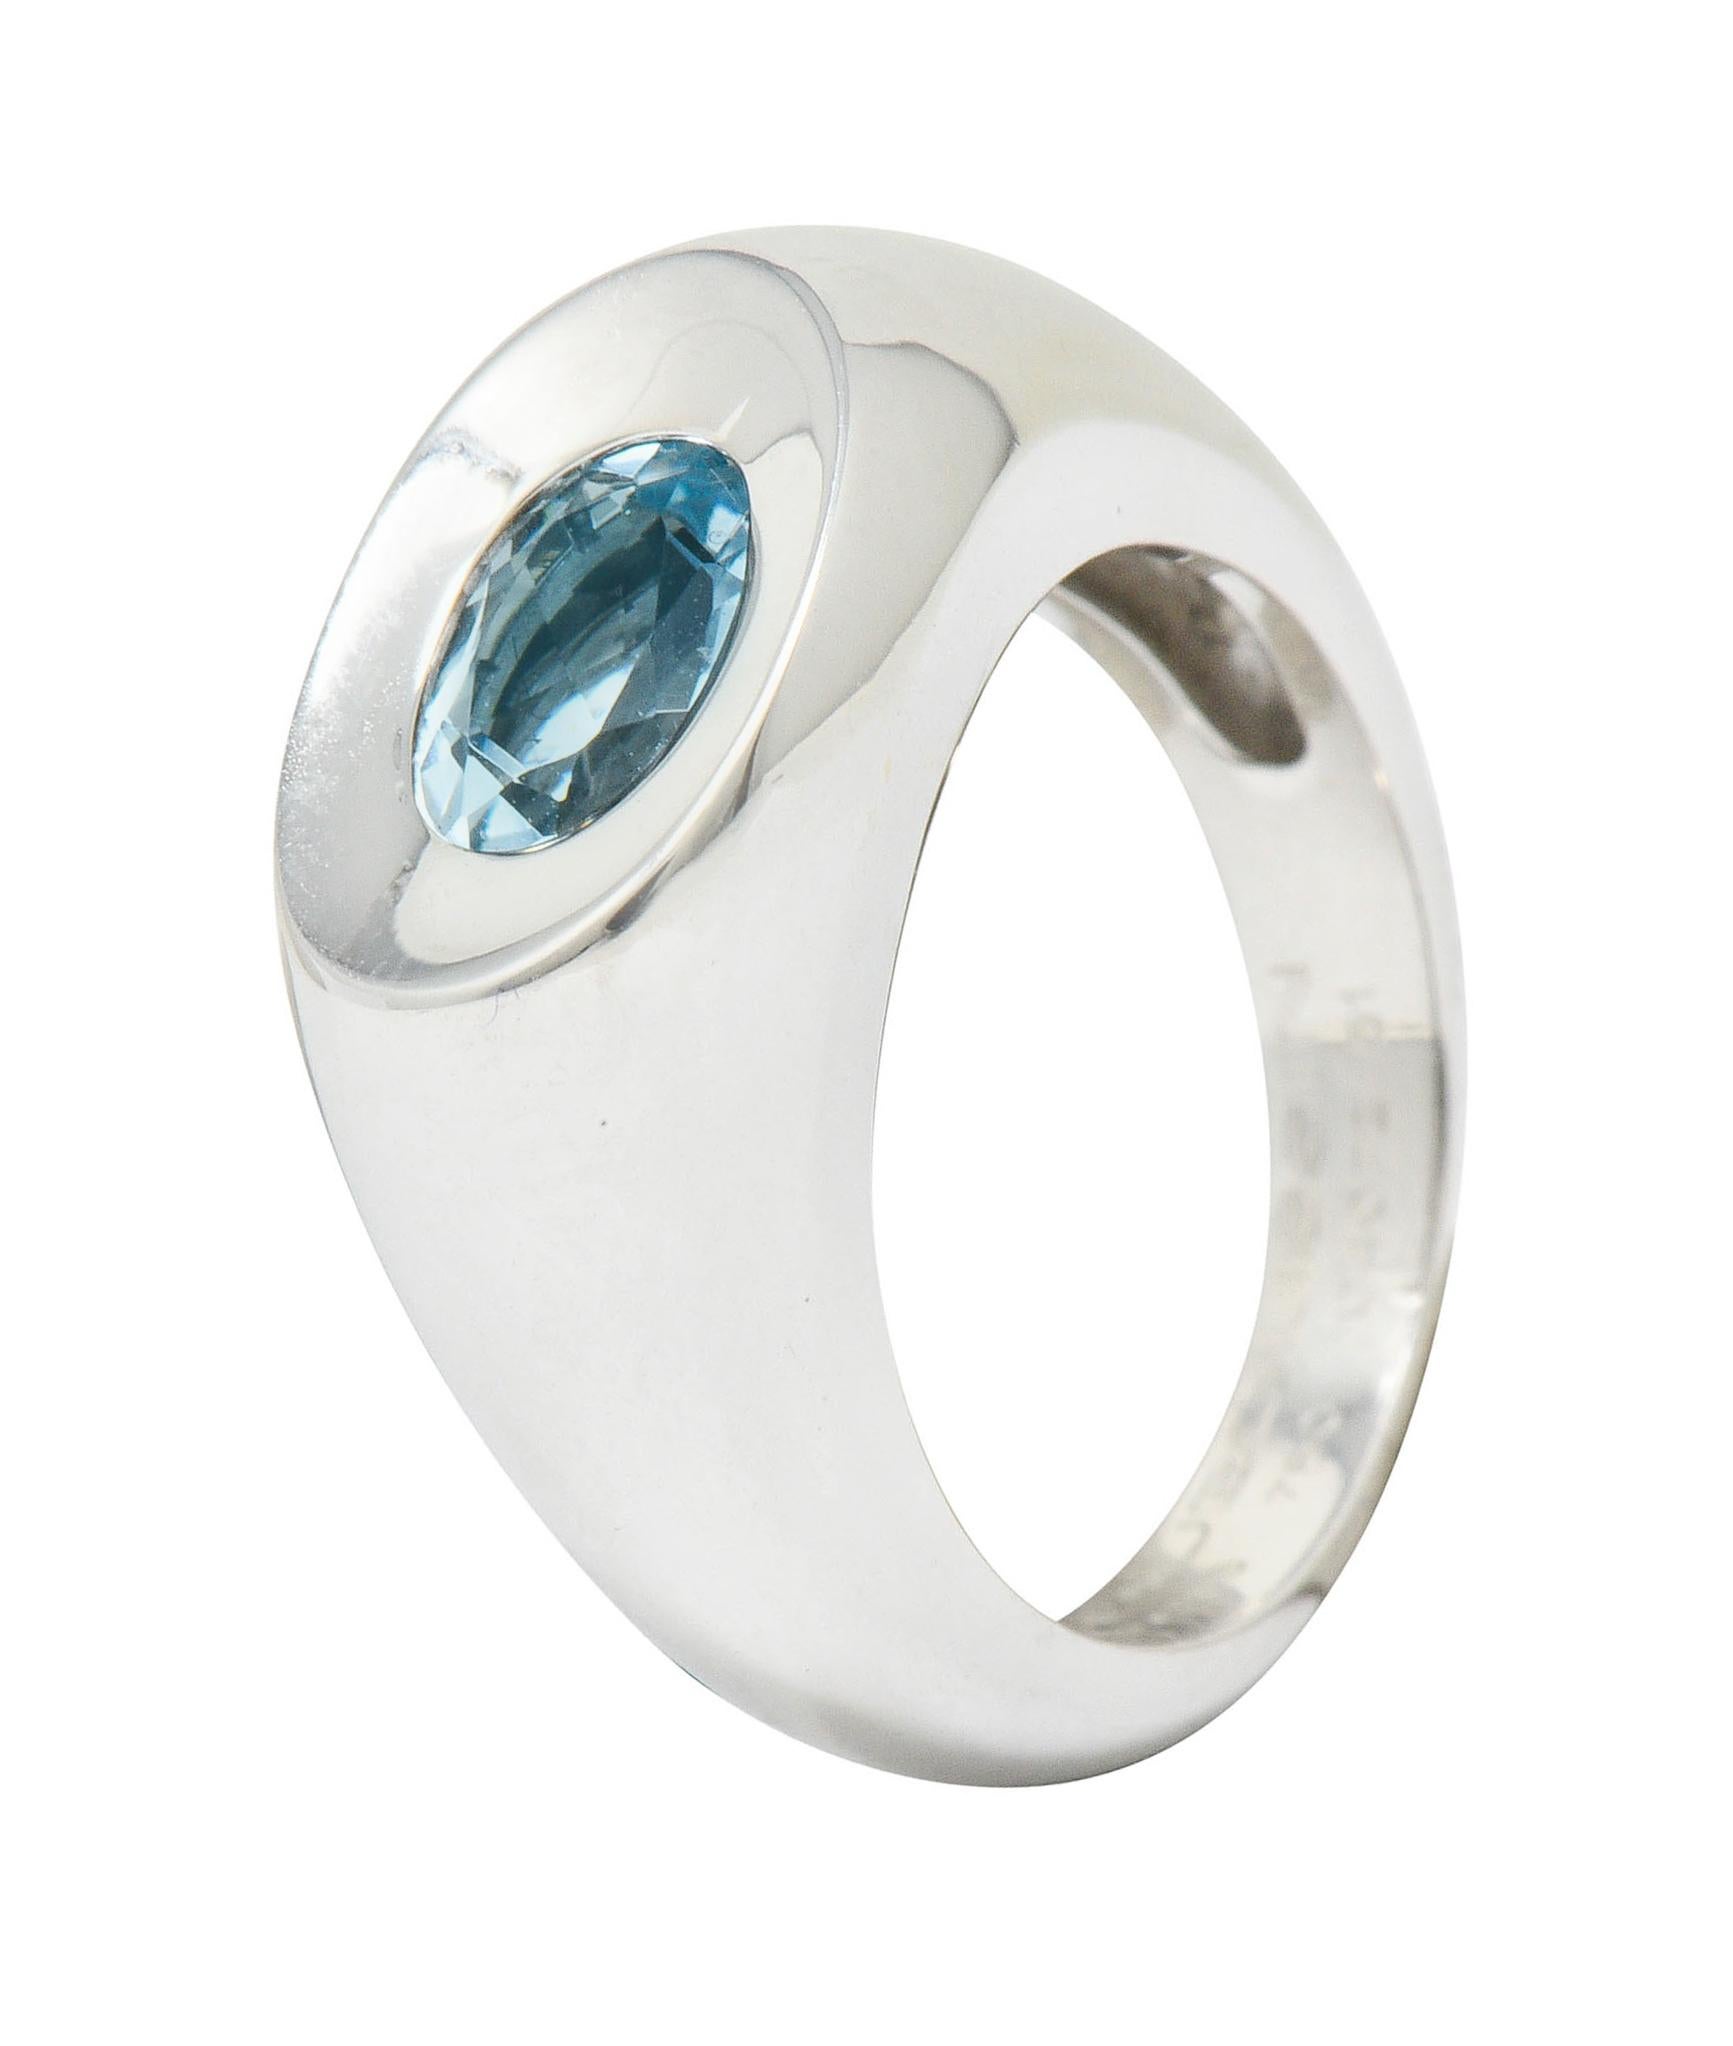 Polished white gold bombé stye band ring with a concave top

Featuring a flush set oval cut blue topaz measuring approximately 7.3 x 5.3 mm; light blue in color

Numbered, fully signed Mauboussin Paris, and with maker's mark

Stamped 750 and with